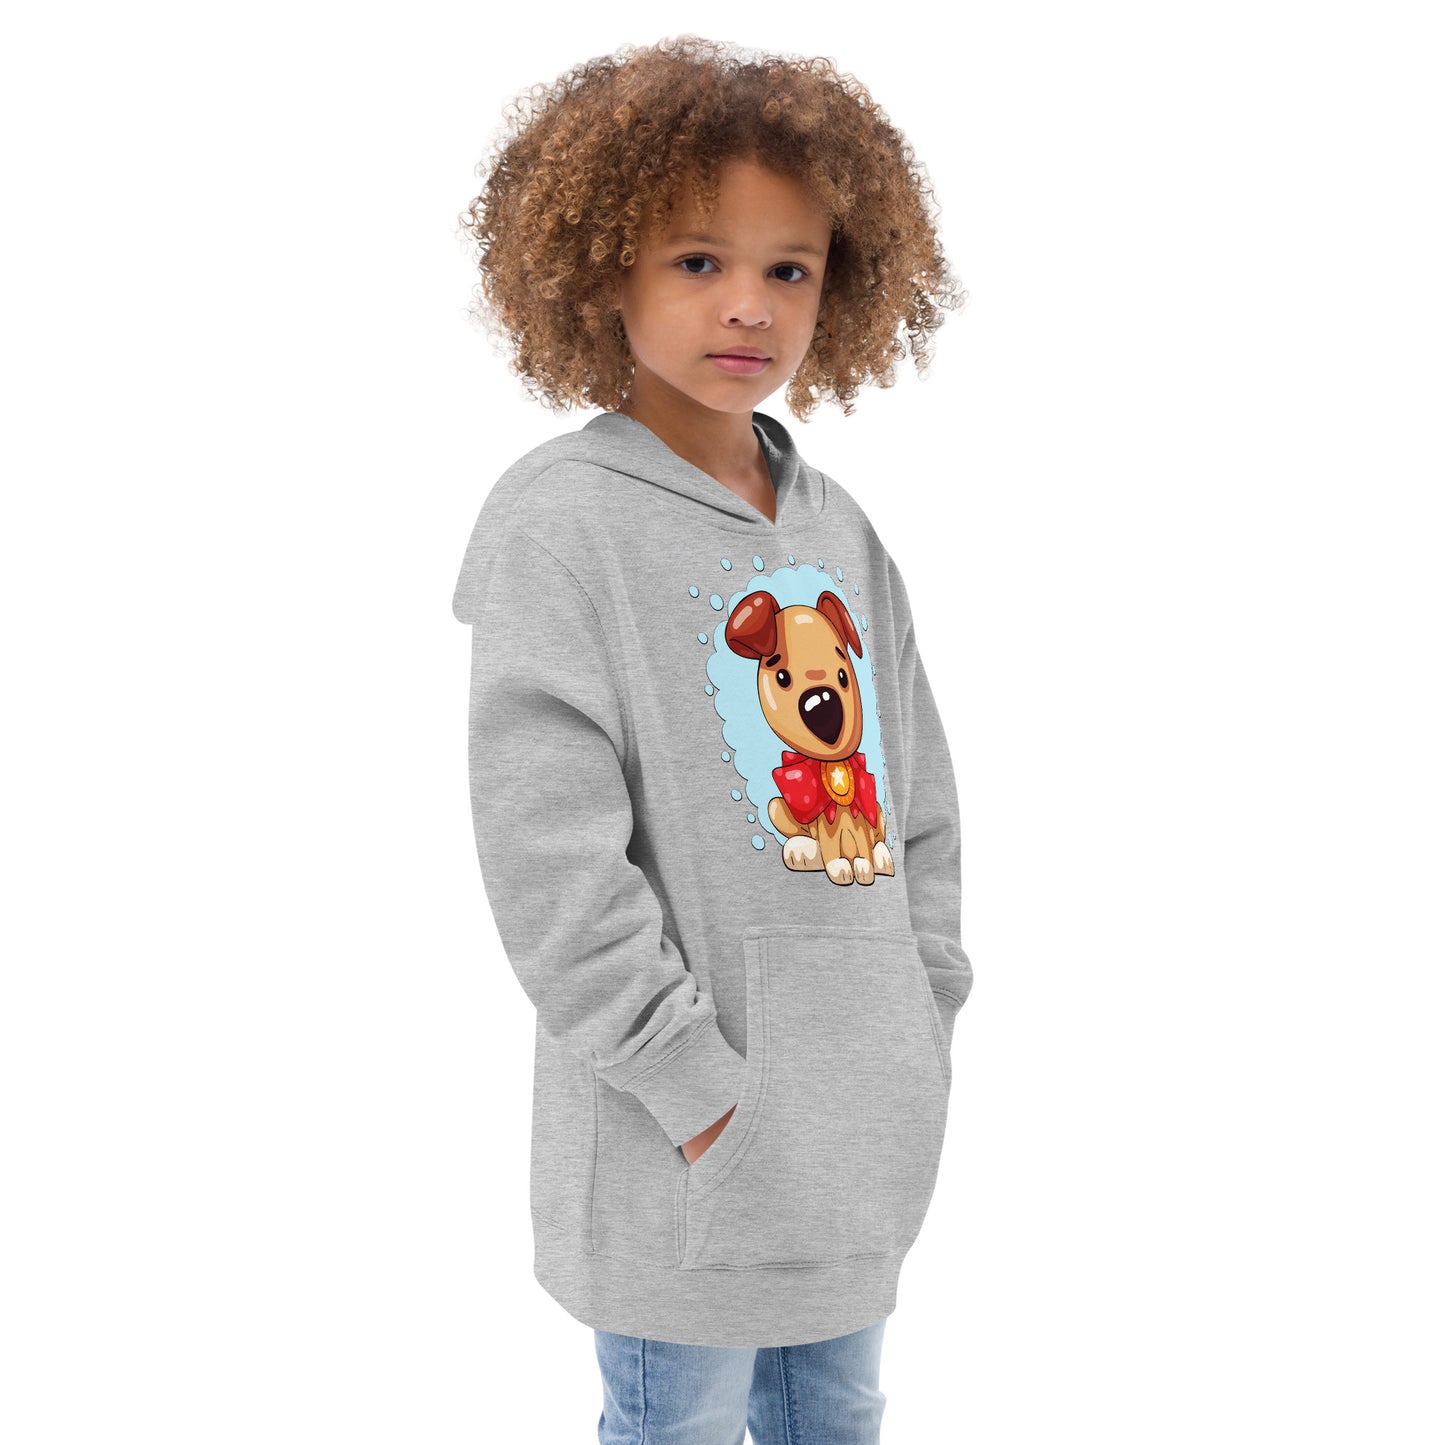 Cute Puppy Dog with Medal Hoodie, No. 0373